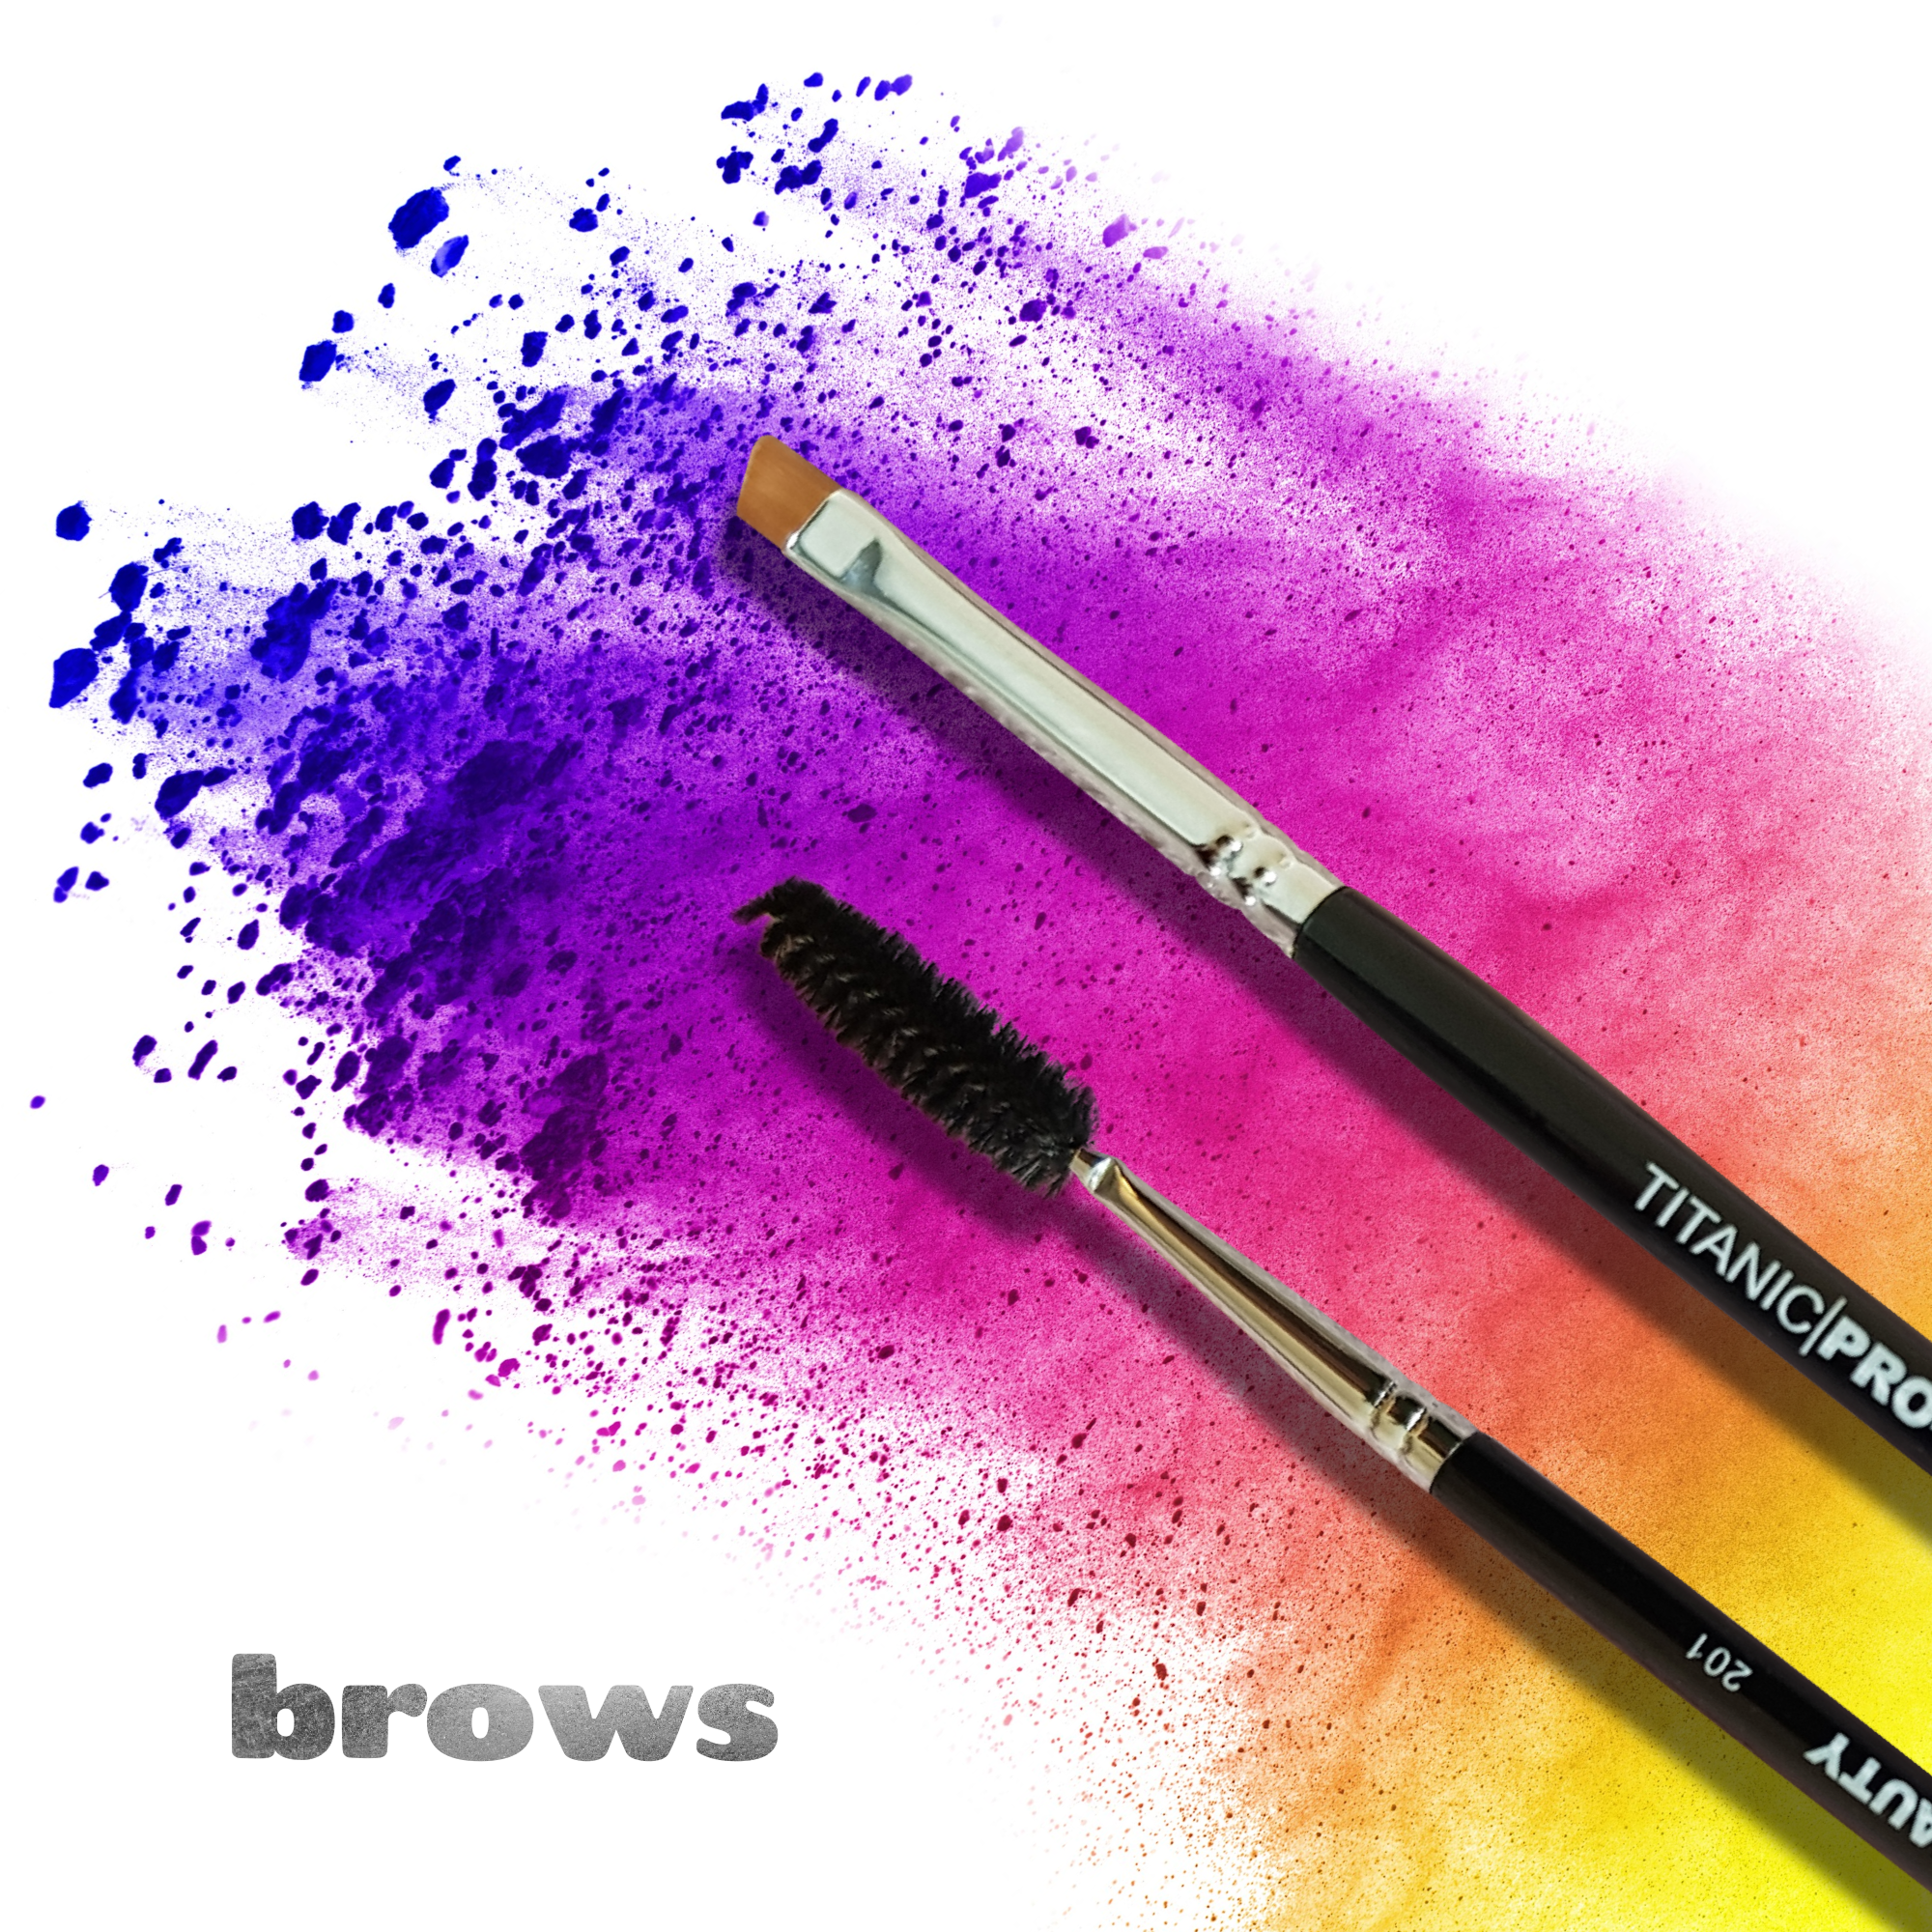 The Brow Makeup Brush Collection